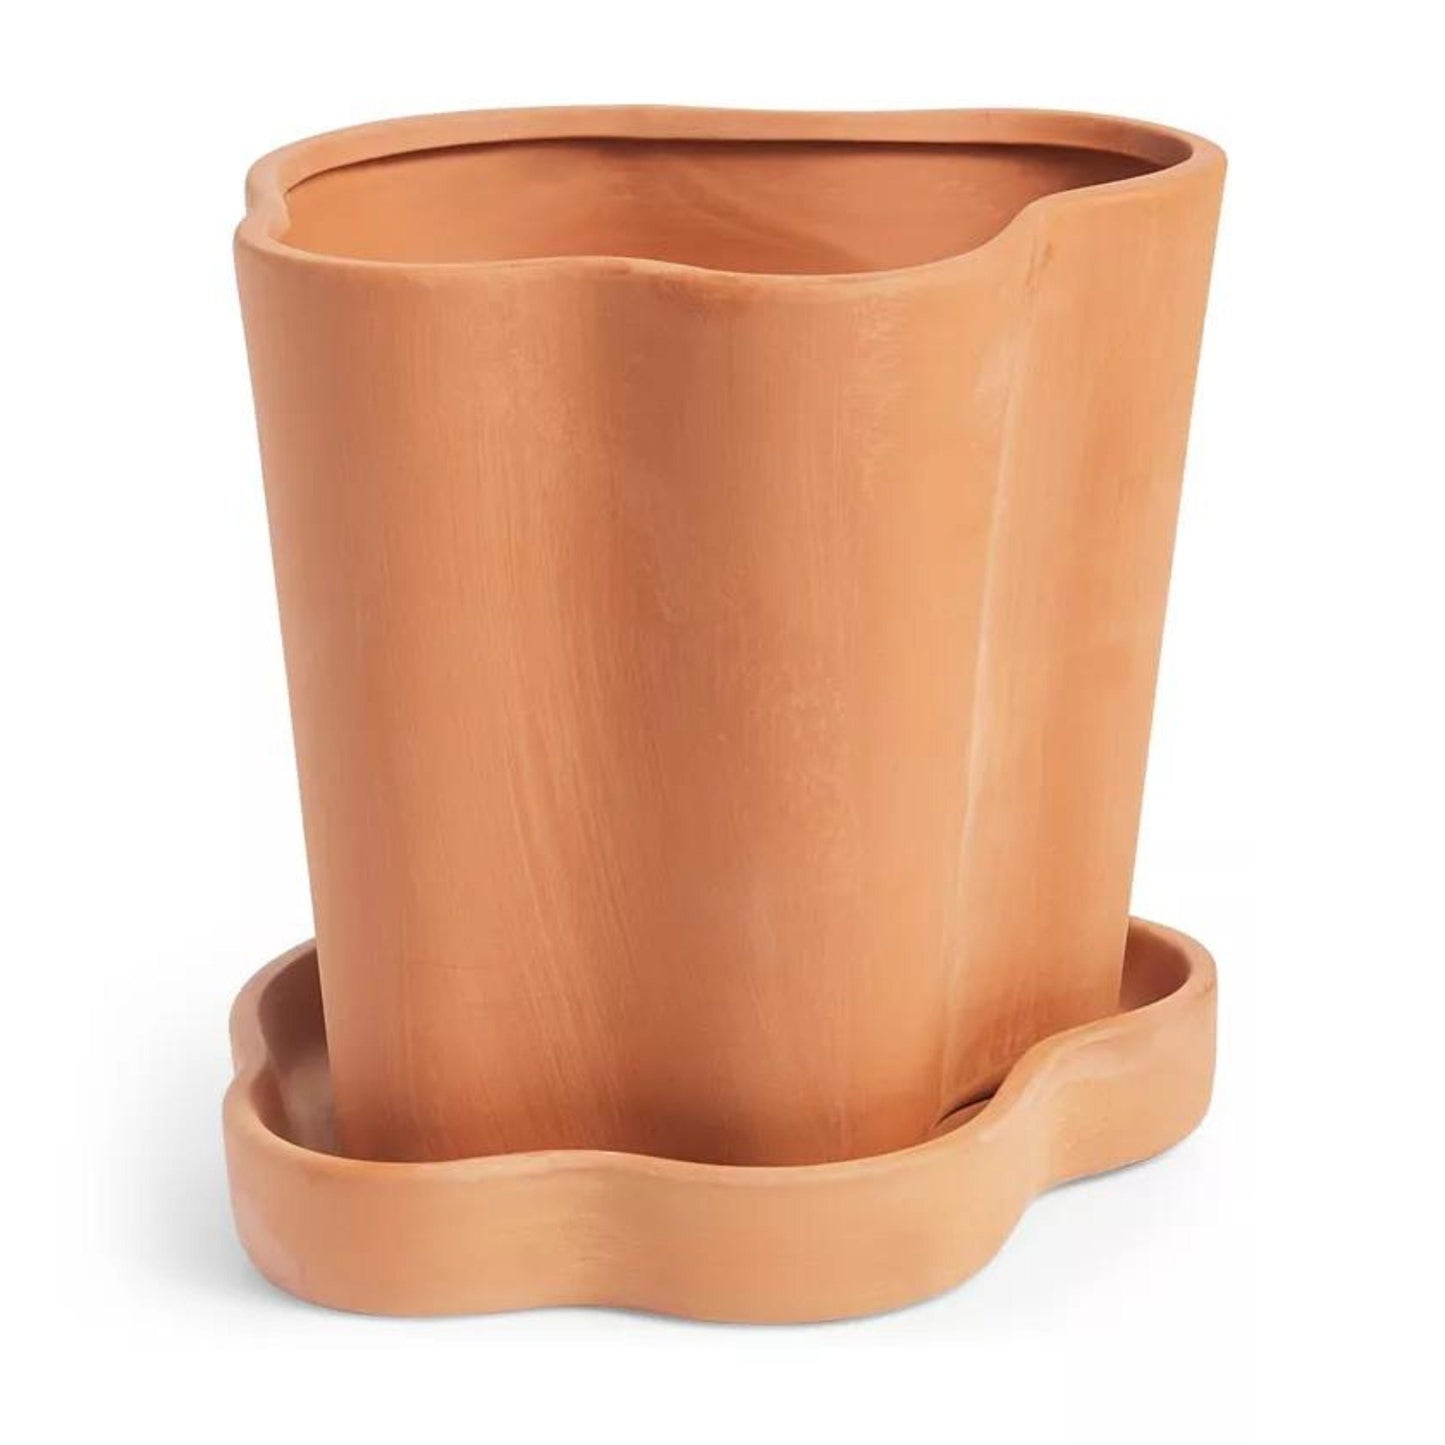 OAKE Home Decoration & Accessories Brown OAKE - Terracotta Planter & Saucer